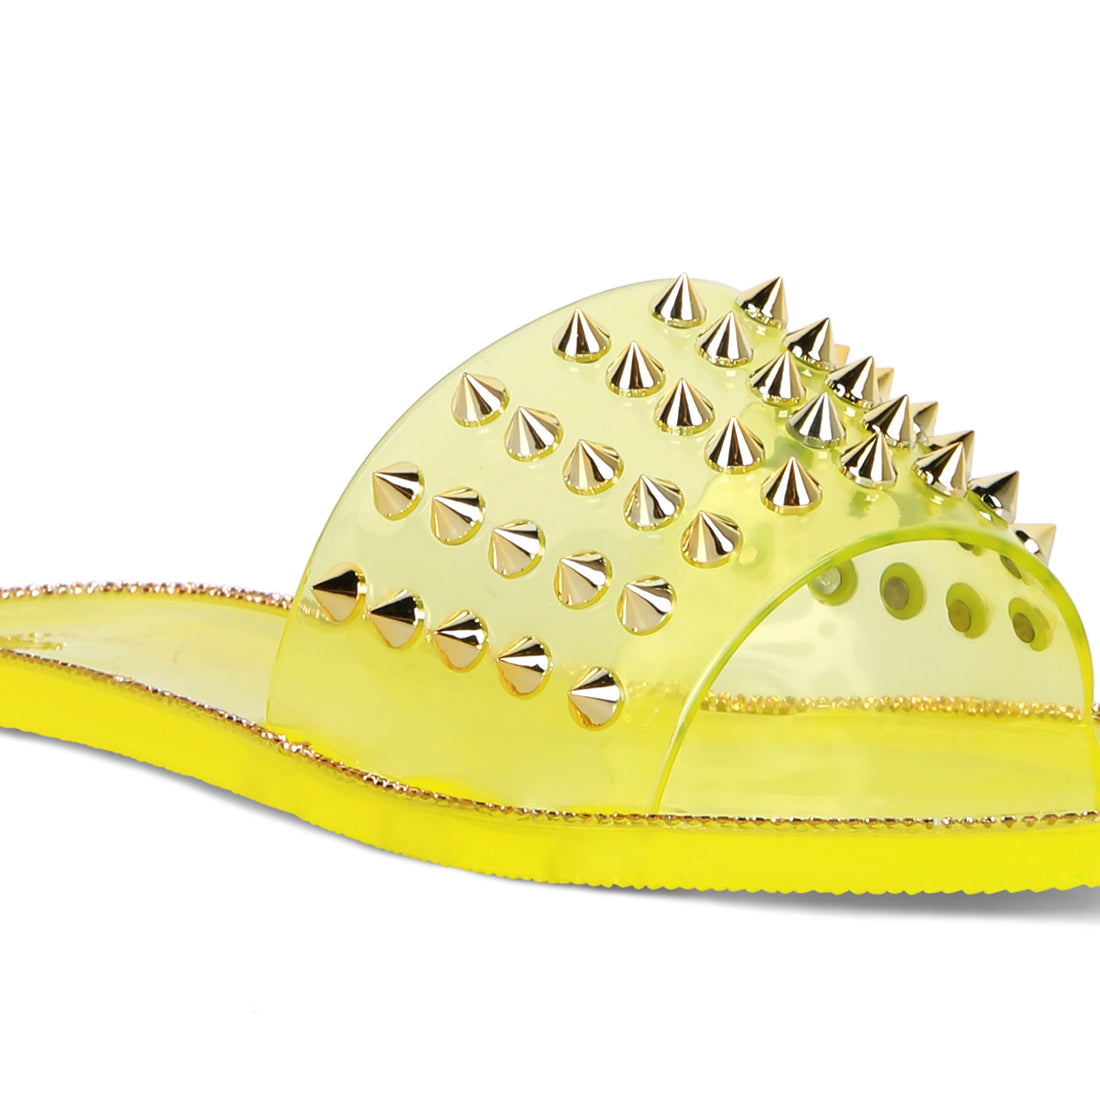 Yellow Punk Stud Clear Jelly Flats